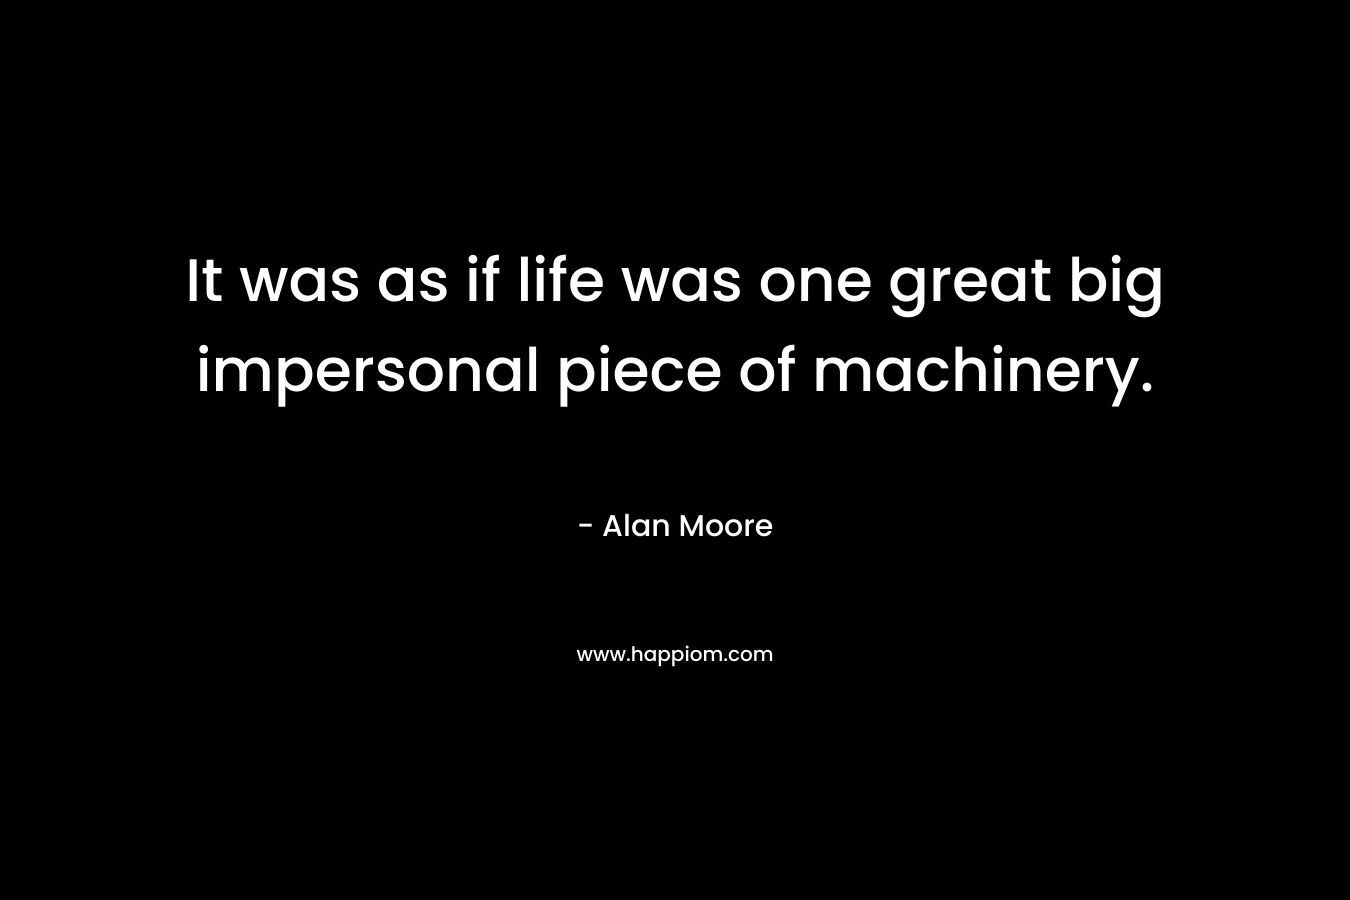 It was as if life was one great big impersonal piece of machinery. – Alan Moore